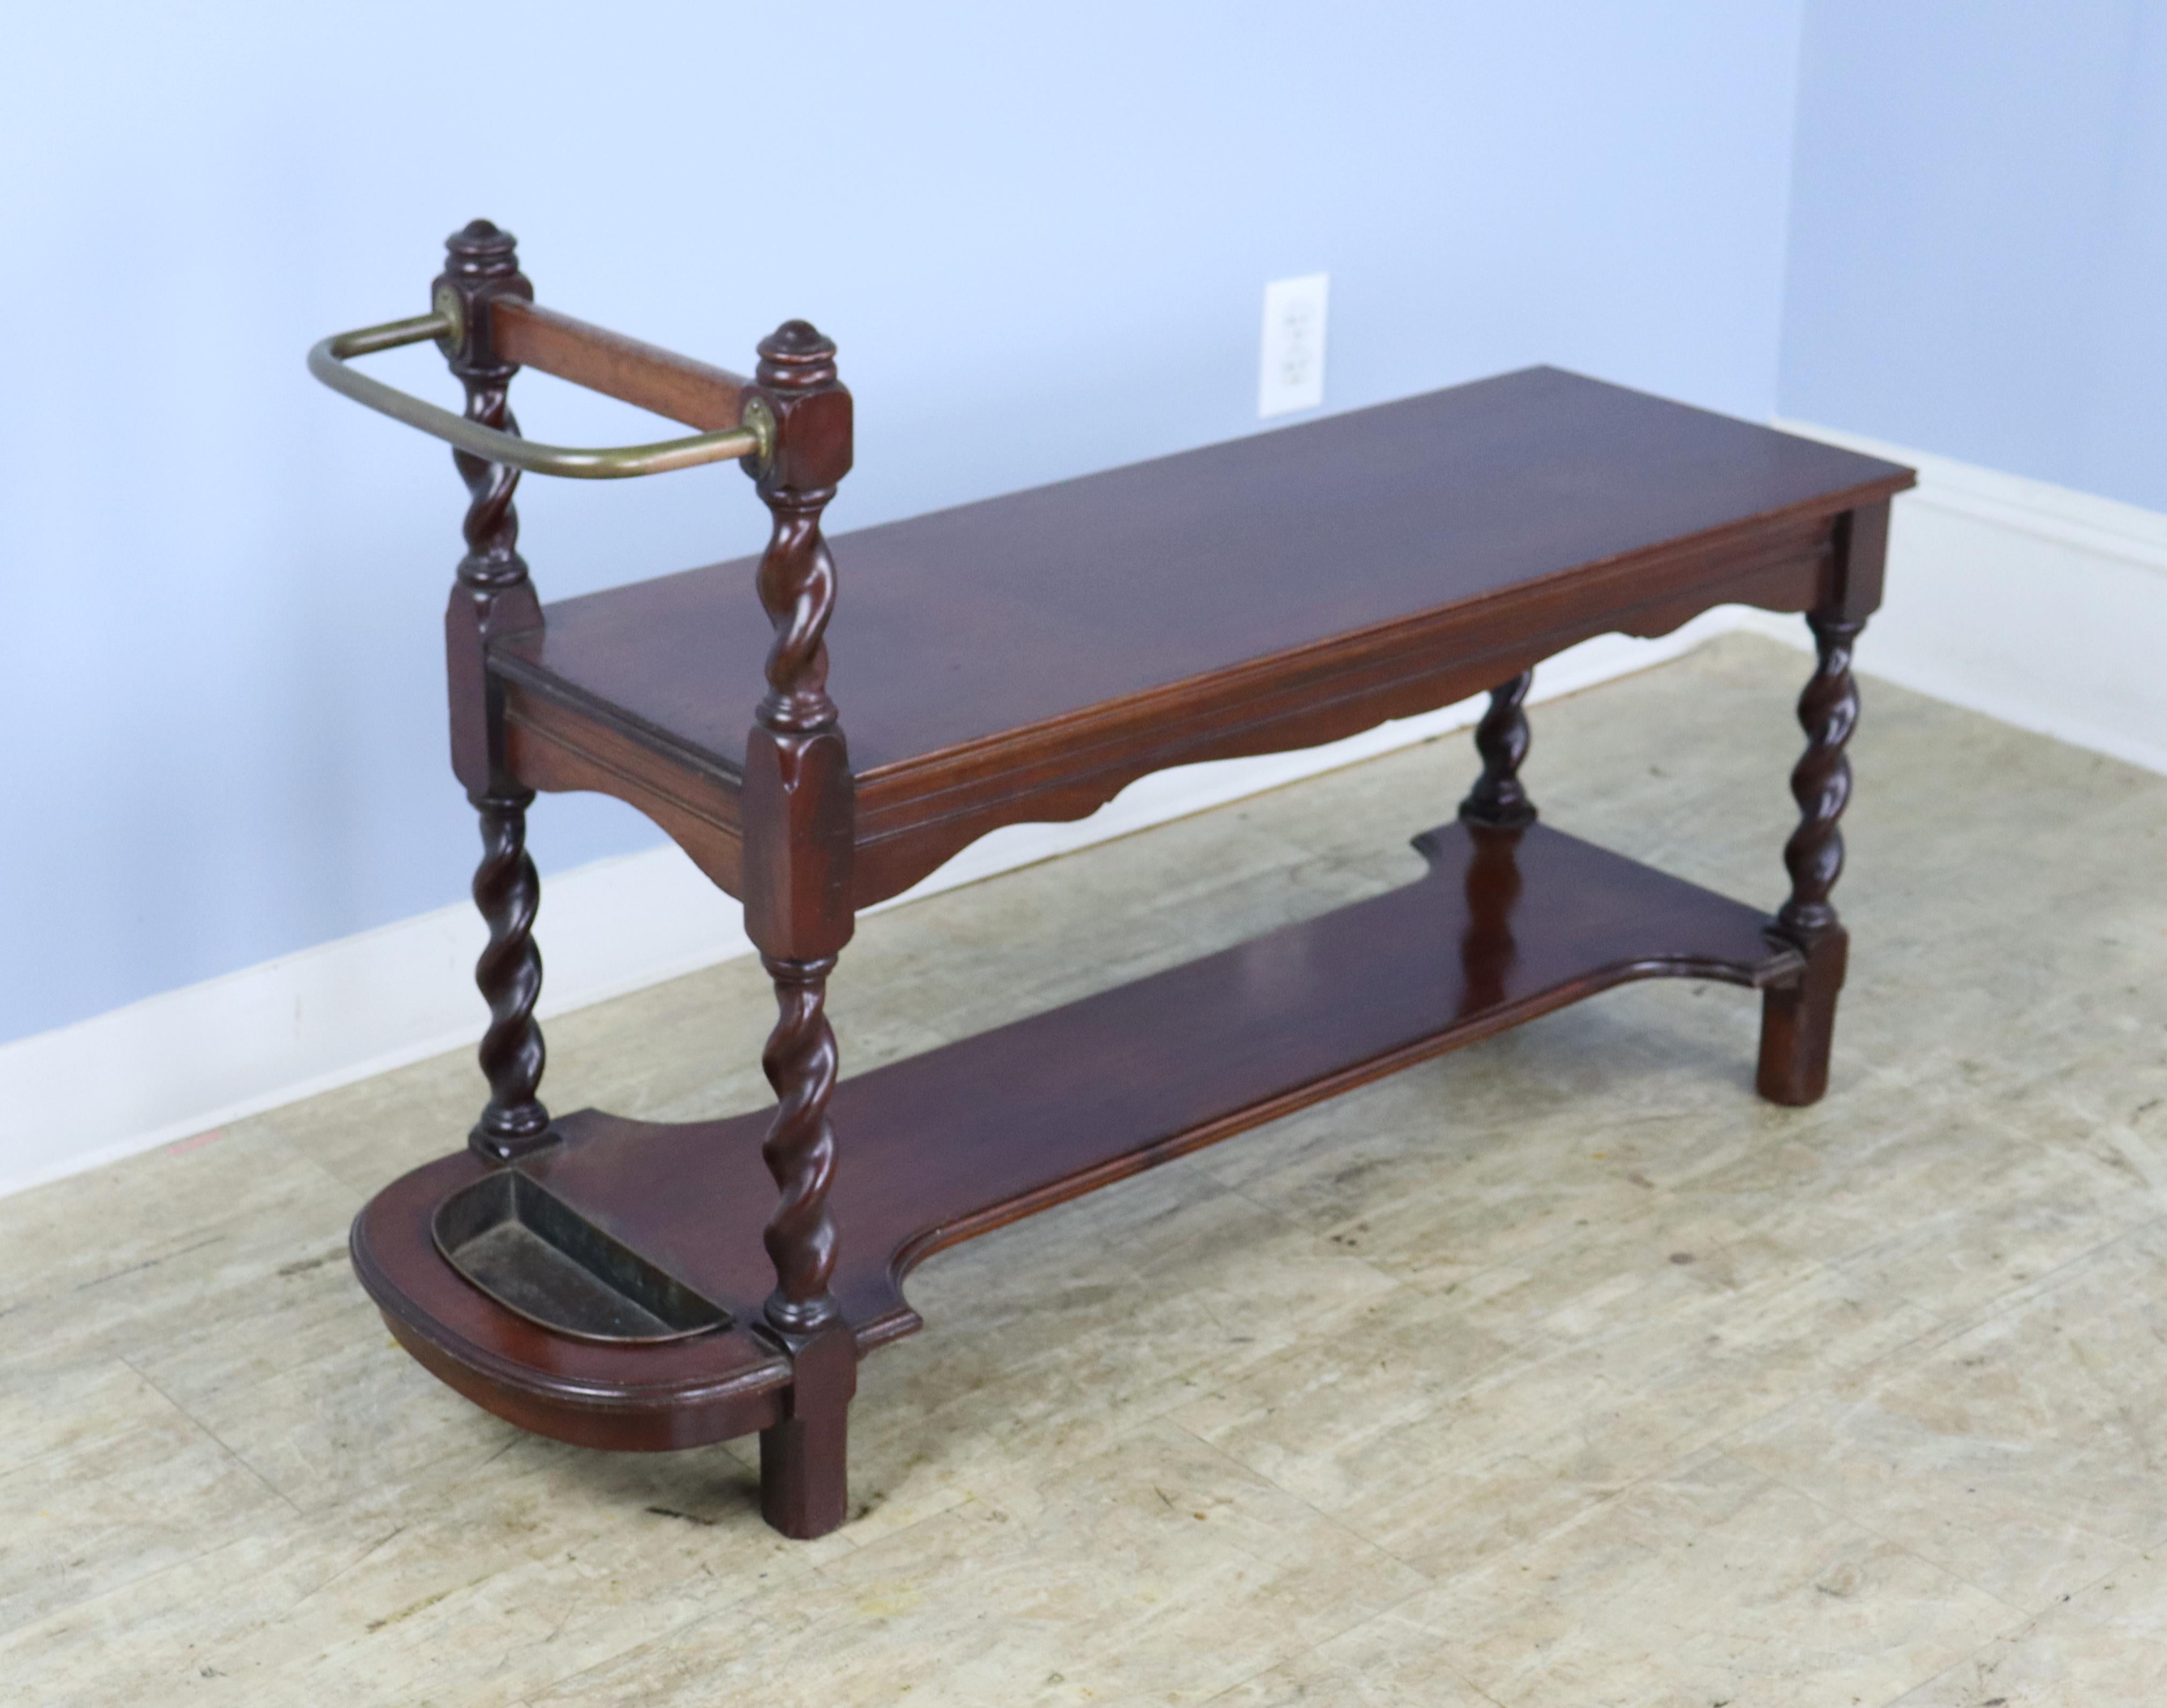 A hall bench in glossy mahogany wih barley twist legs that also serves as an umbrella stand.  